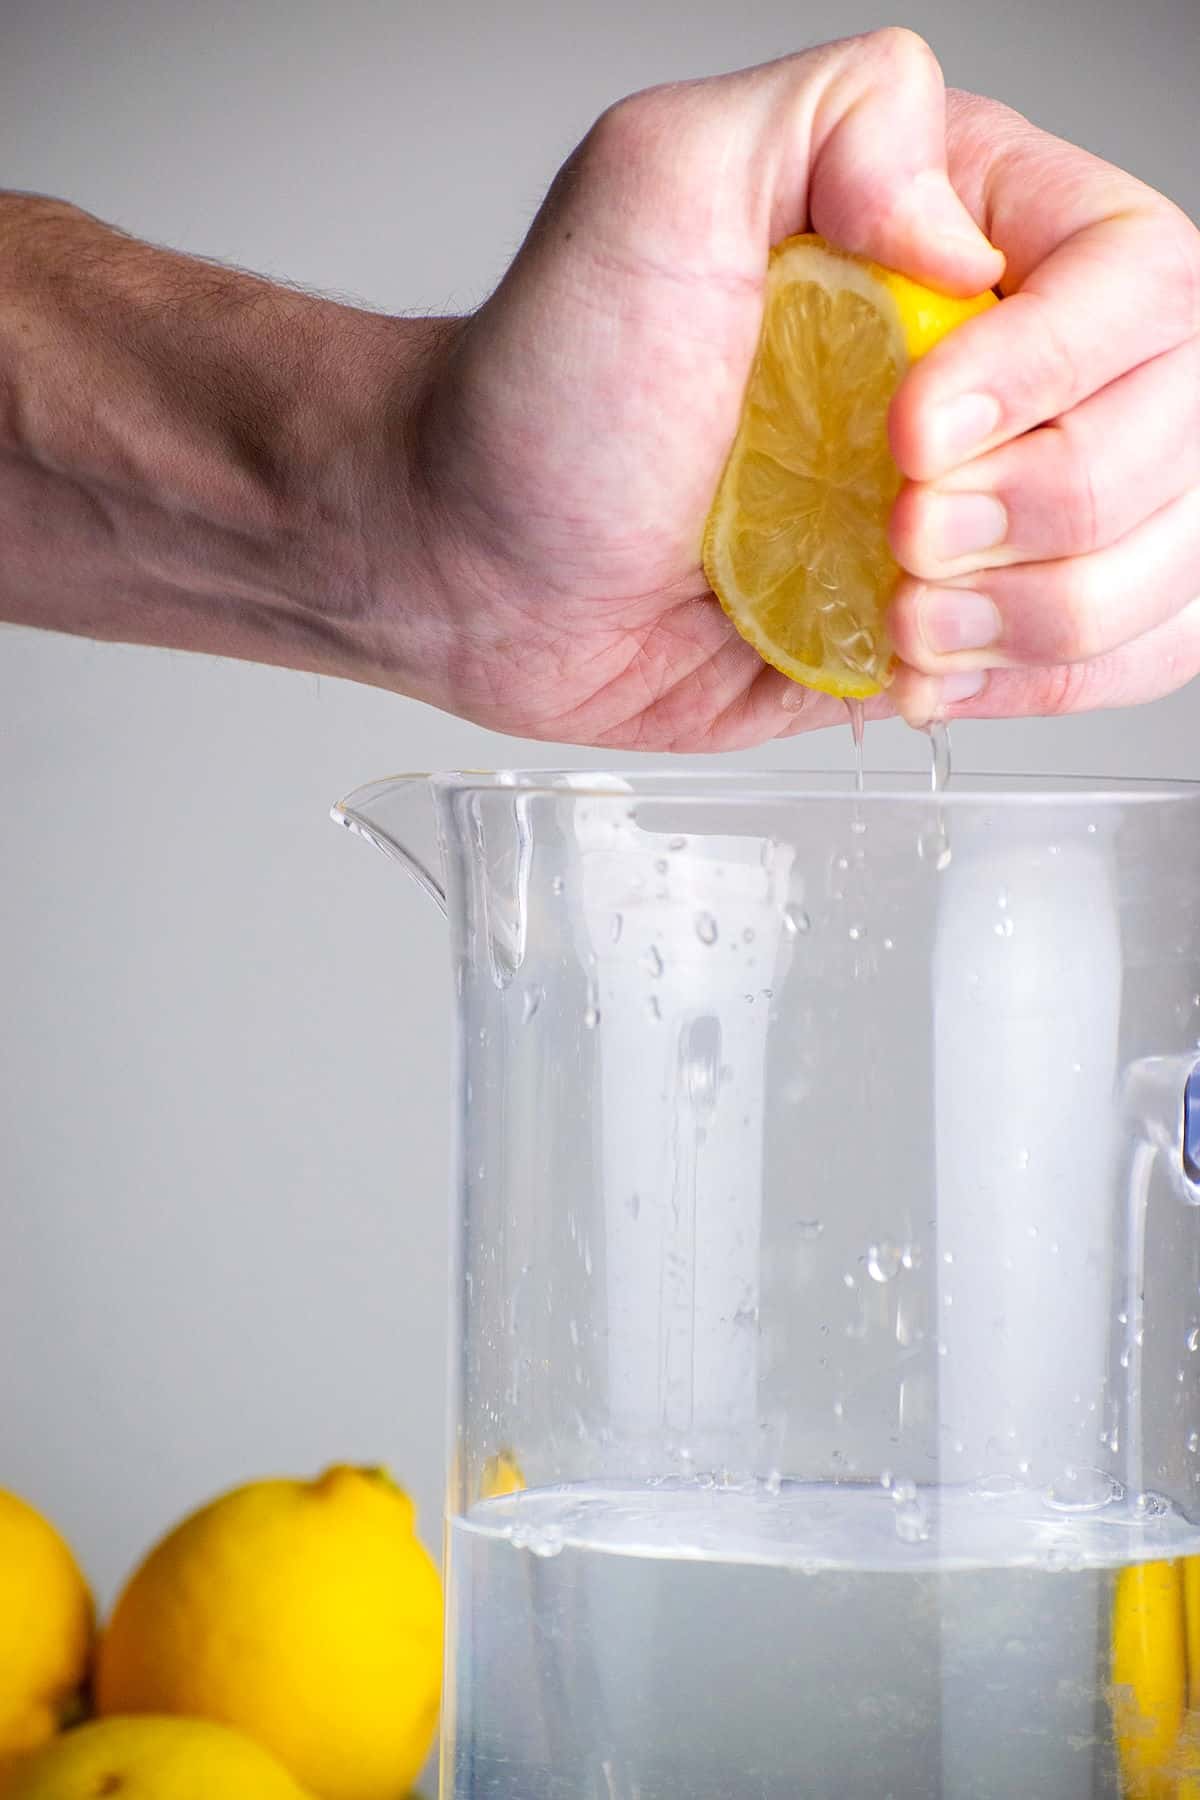 Lemon getting squeezed into pitcher of water.